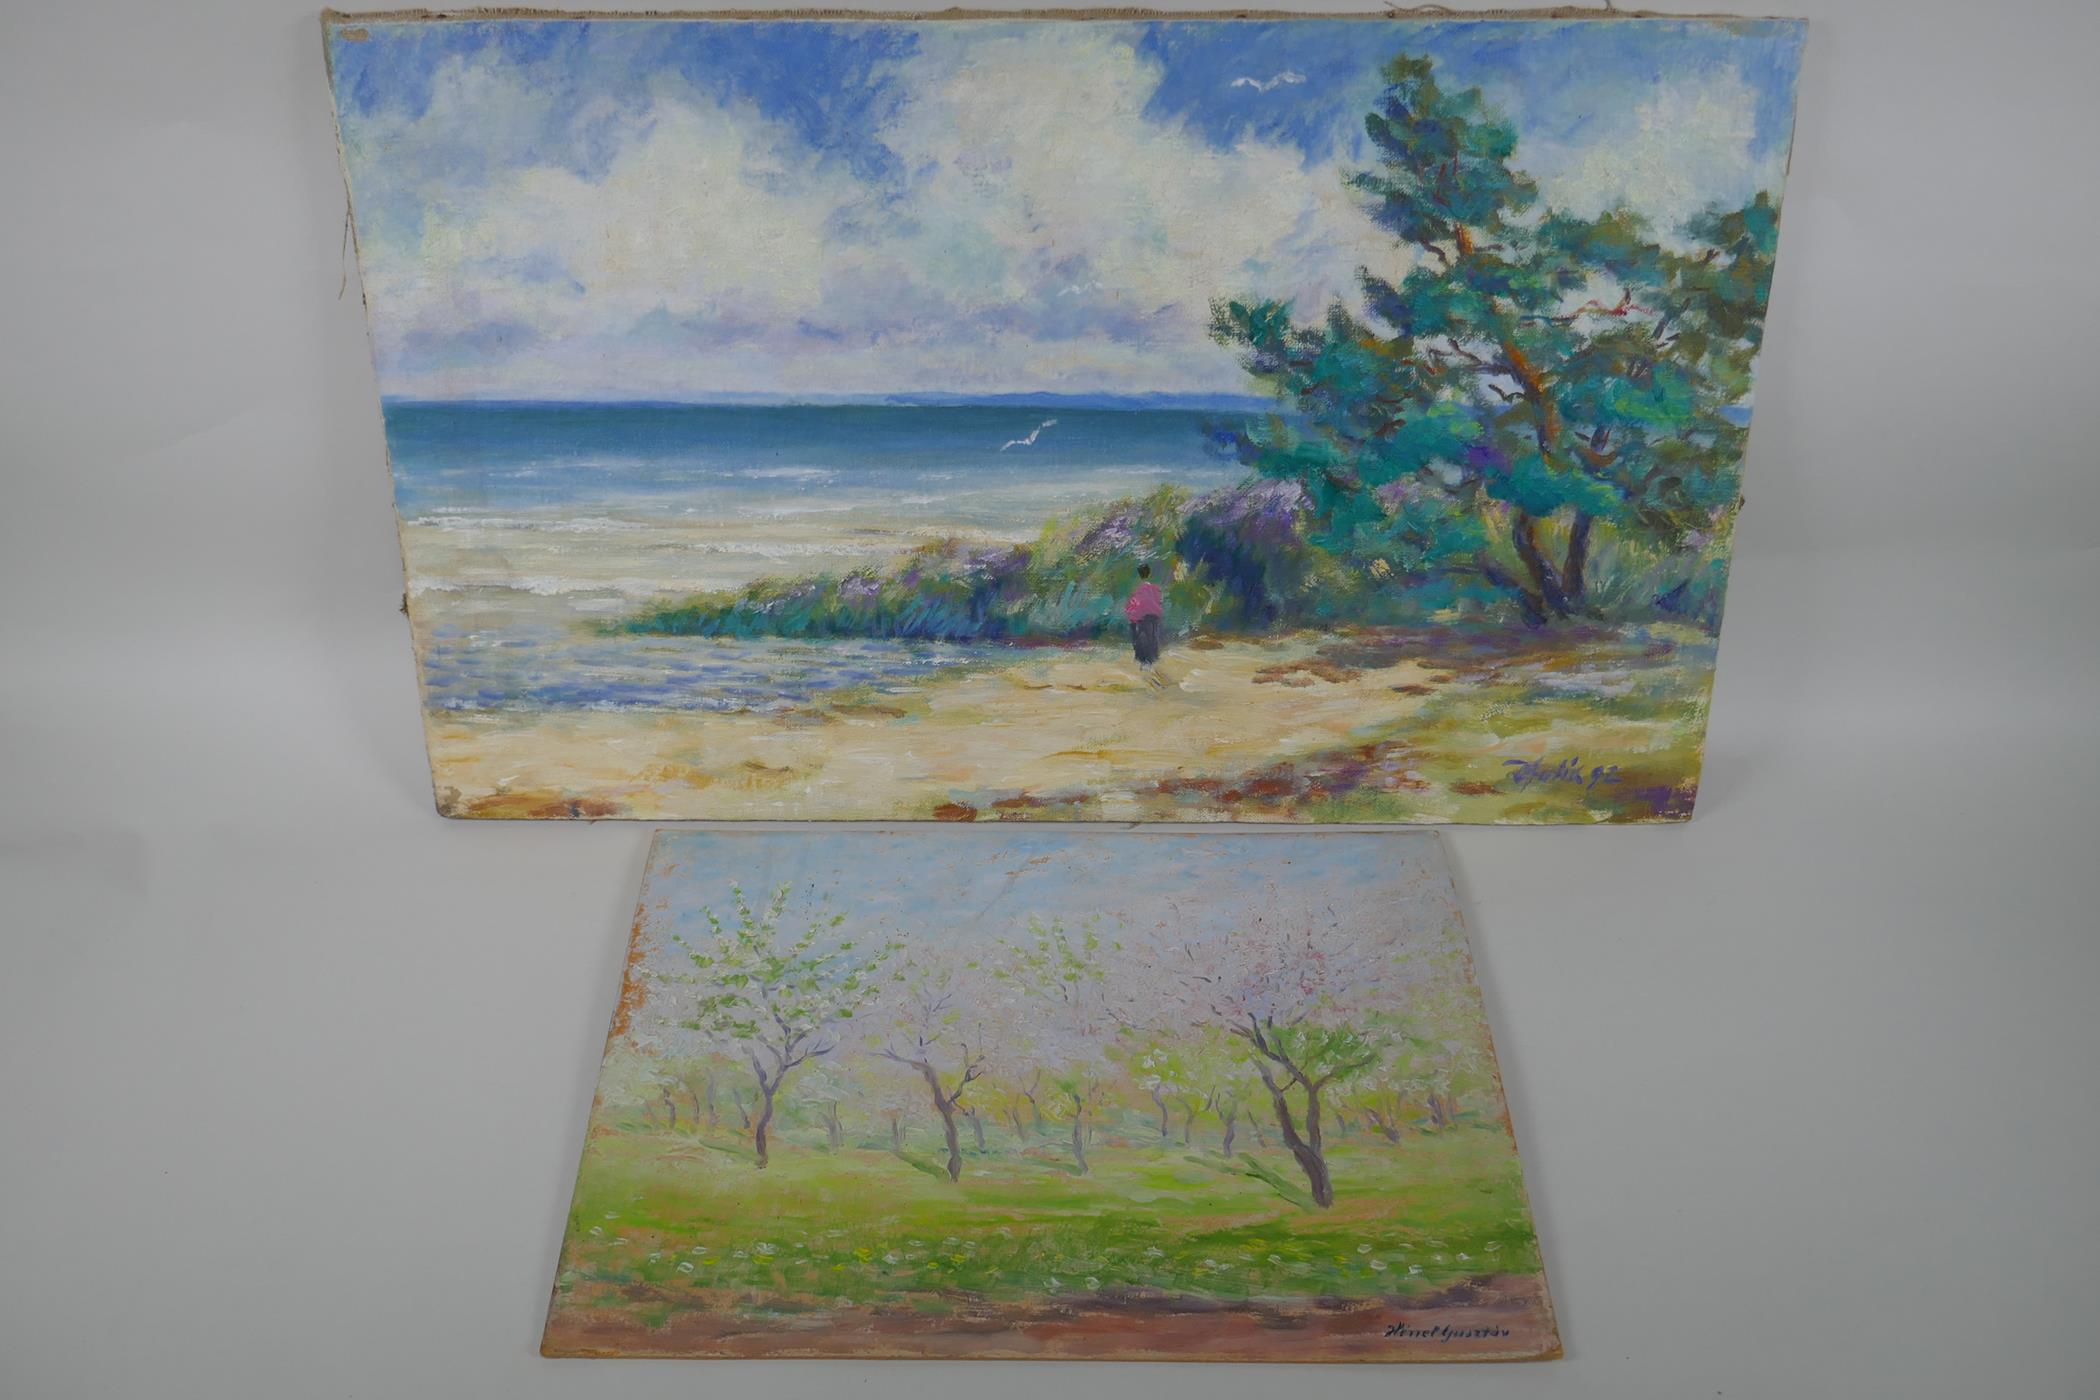 Coastal landscape, signed Viktor Aulik, and a view of an orchard in spring, signed Guszstav Henel,